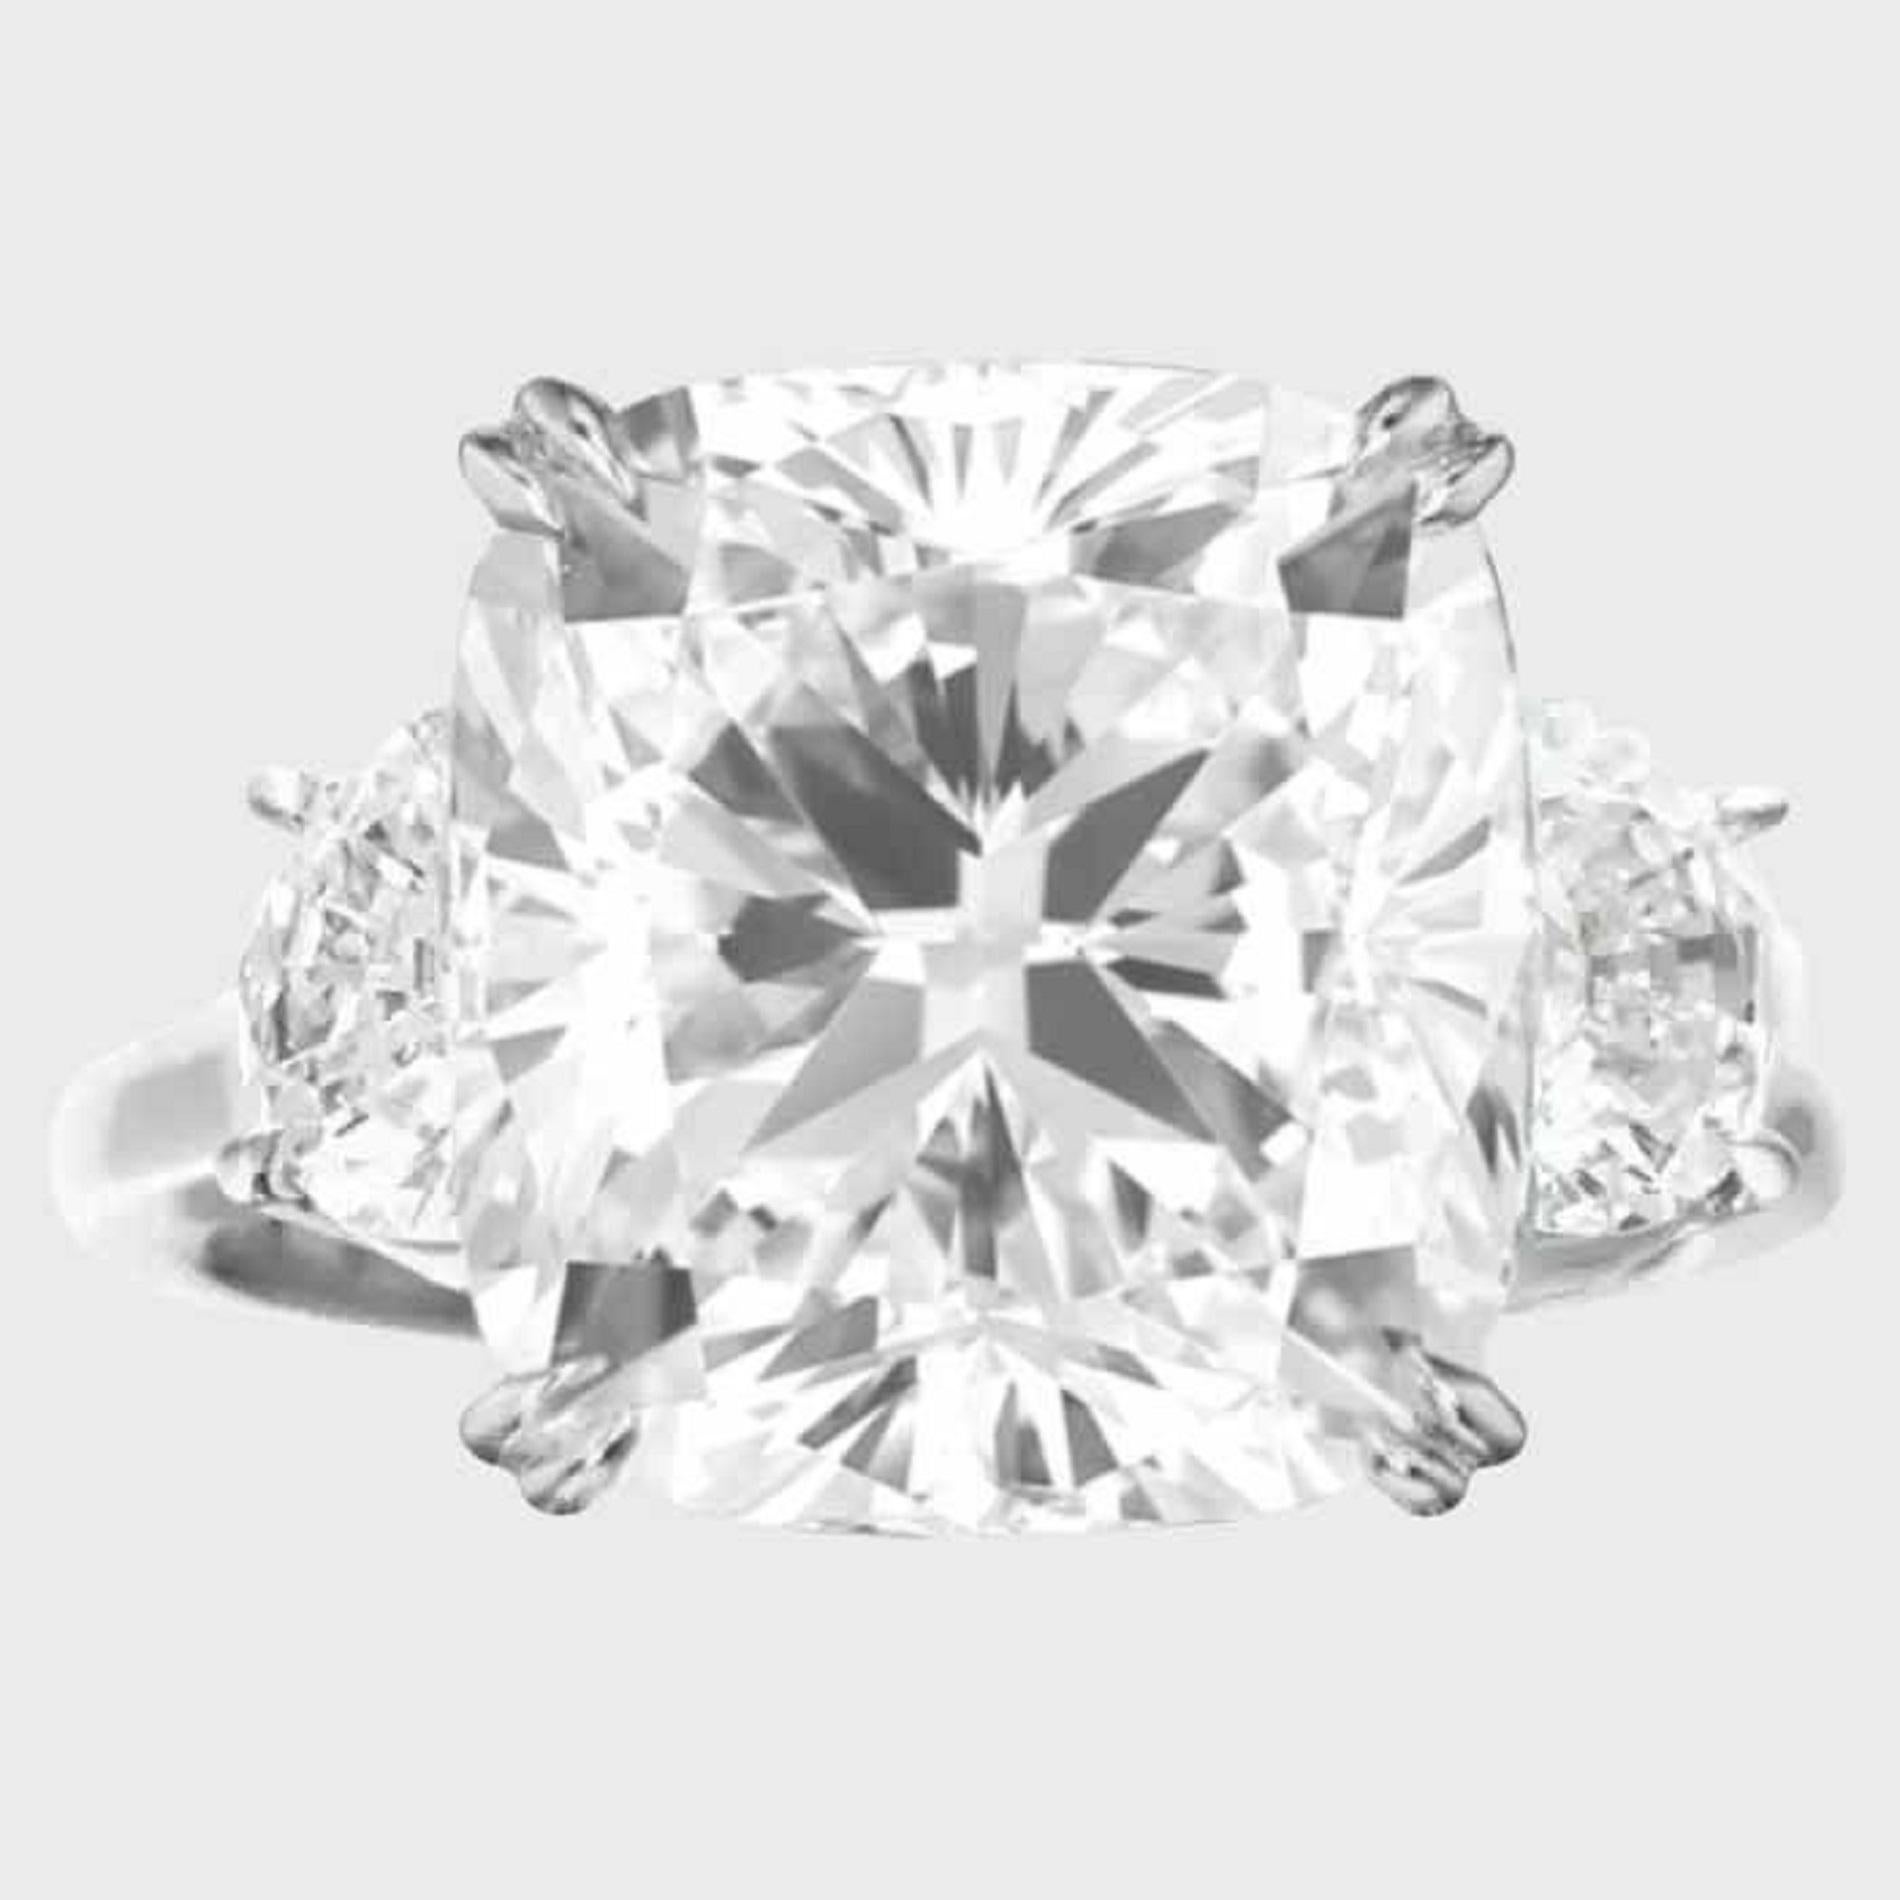 Forged in the refinement of solid platinum, this ring is a marvel of jewelry artistry featuring a resplendent 10 carat cushion cut diamond. 

With the Gemological Institute of America's certification, the diamond is distinguished by a G color